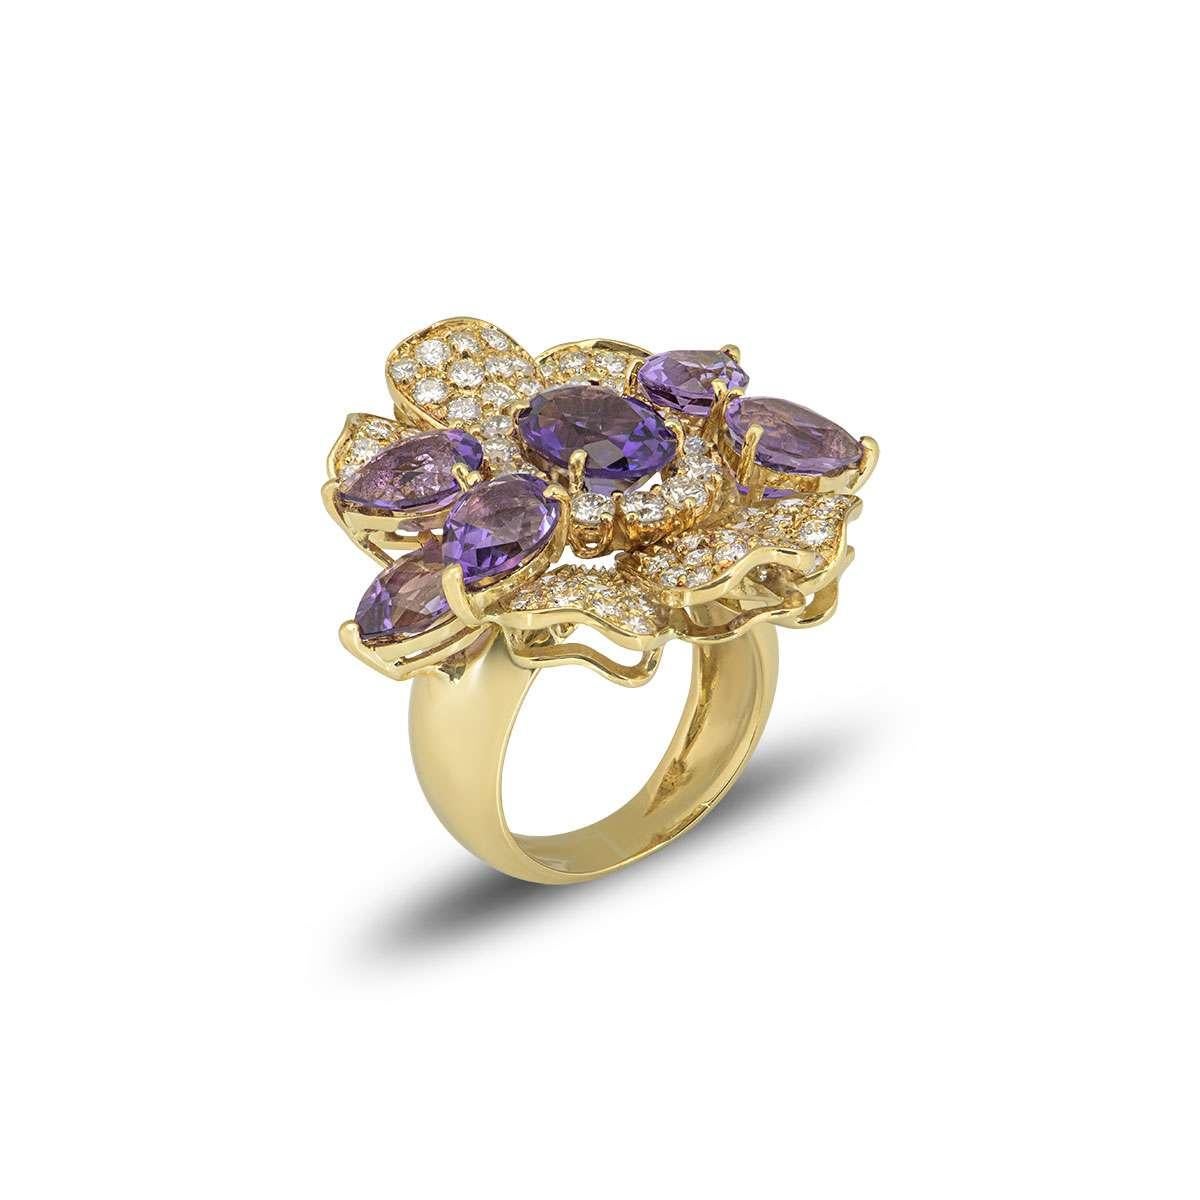 An 18k yellow gold floral style dress ring. The ring is set with 6 pear cut amethyst petals and 6 yellow gold diamond set petals, with an oval amethyst in the centre complemented by a diamond halo. The round brilliant cut diamonds have a total